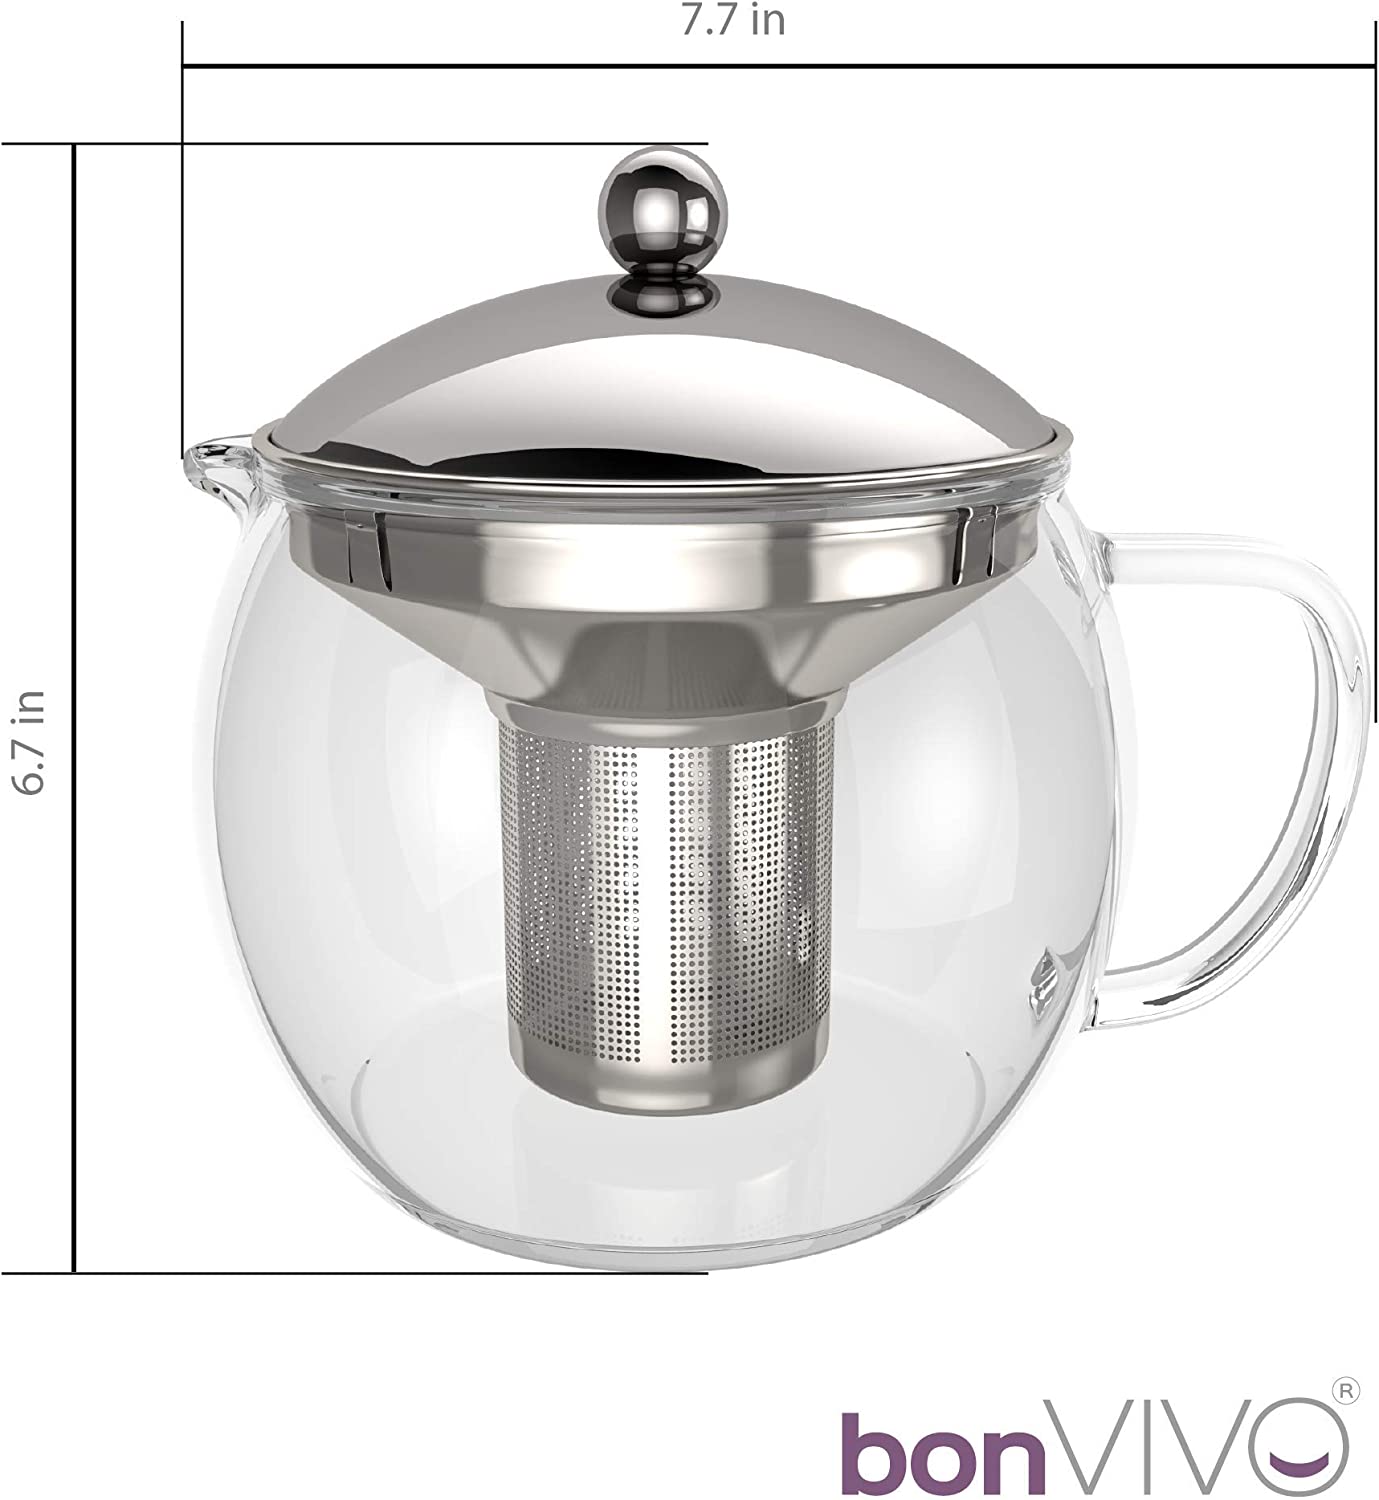 bonVIVO Teapot Tempa Tea Maker with Removable Stainless Steel Strainer, Glass Jug Made of Borosilicate Glass, Heat Resistant, Glass Teapot with Lid in Silver Chrome Look, Tea Infuser, 1500 ml, Silver